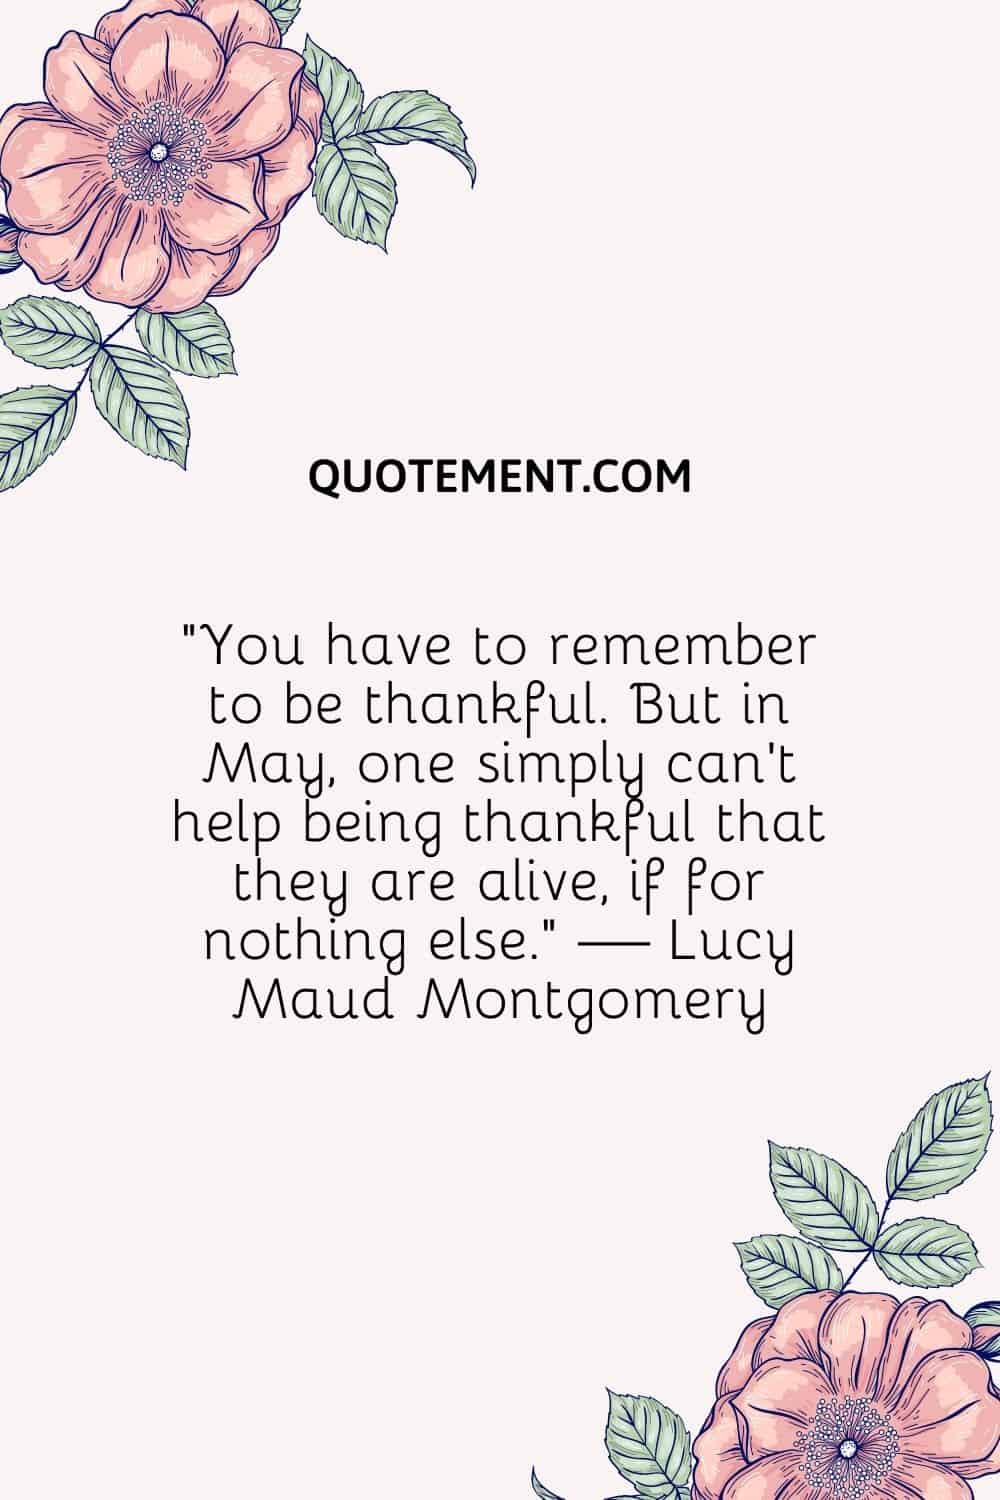 “You have to remember to be thankful. But in May, one simply can’t help being thankful that they are alive, if for nothing else.” — Lucy Maud Montgomery